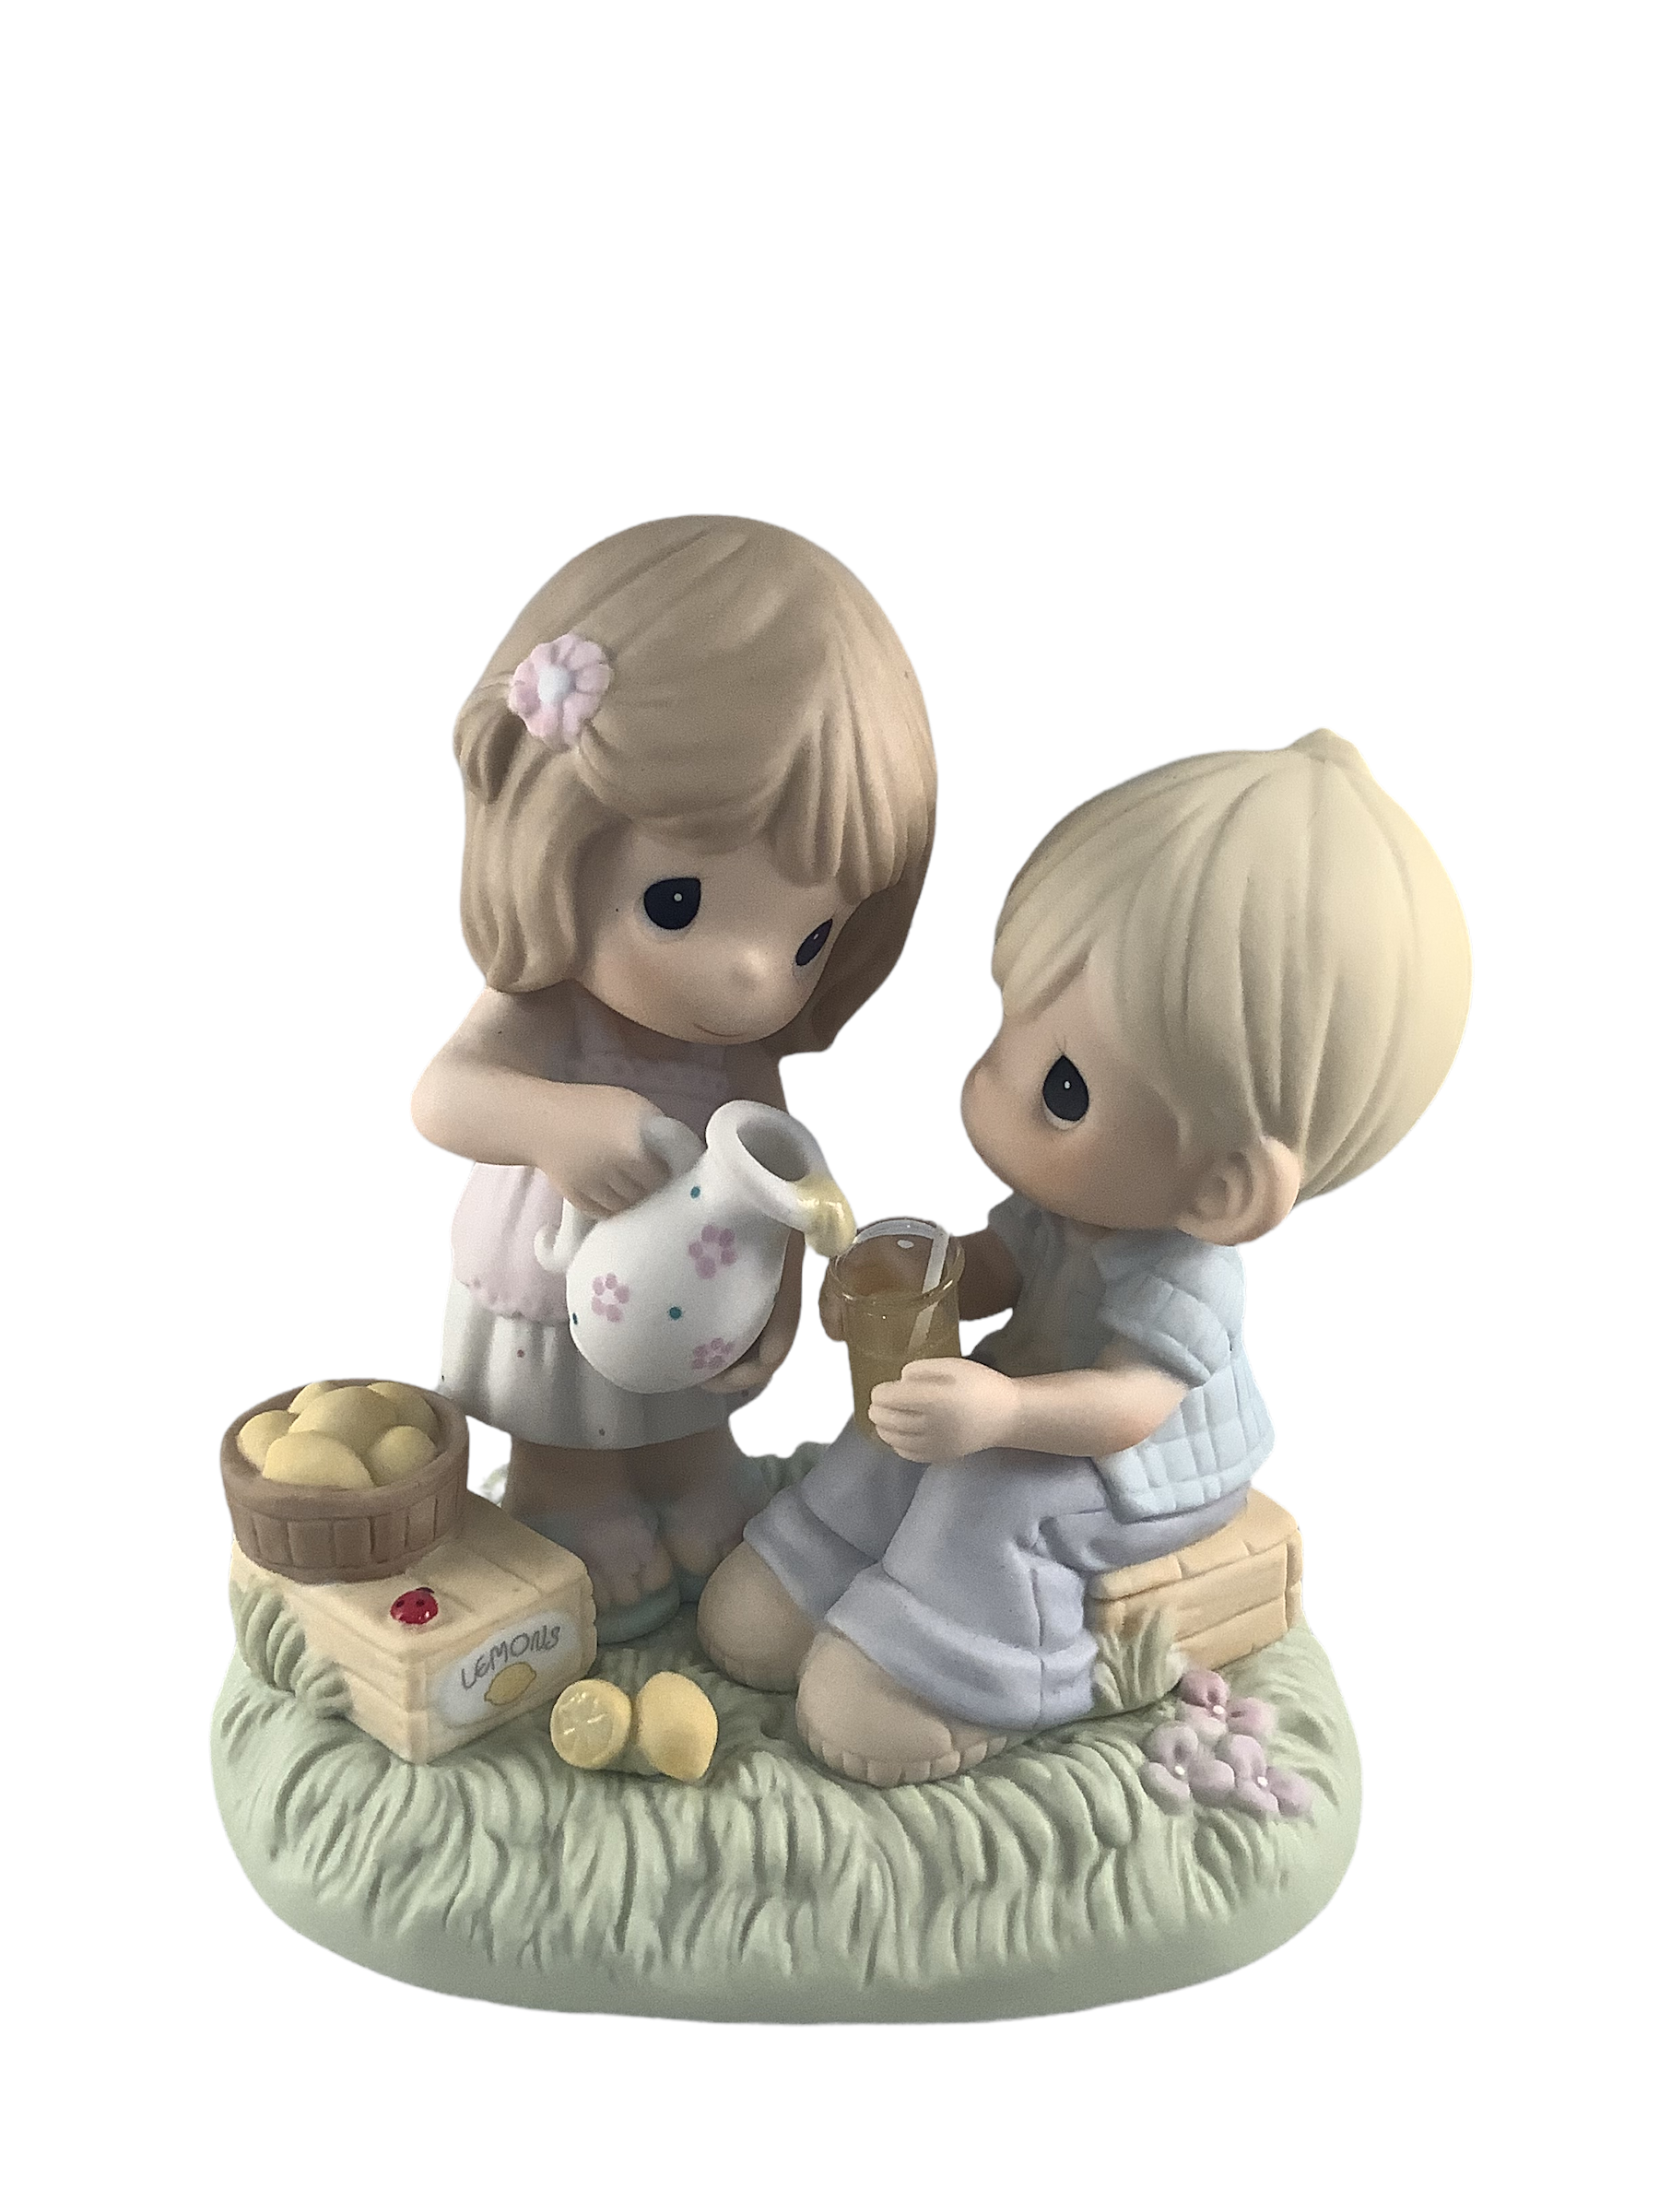 Life Is Sweeter With You - Precious Moment Figurine